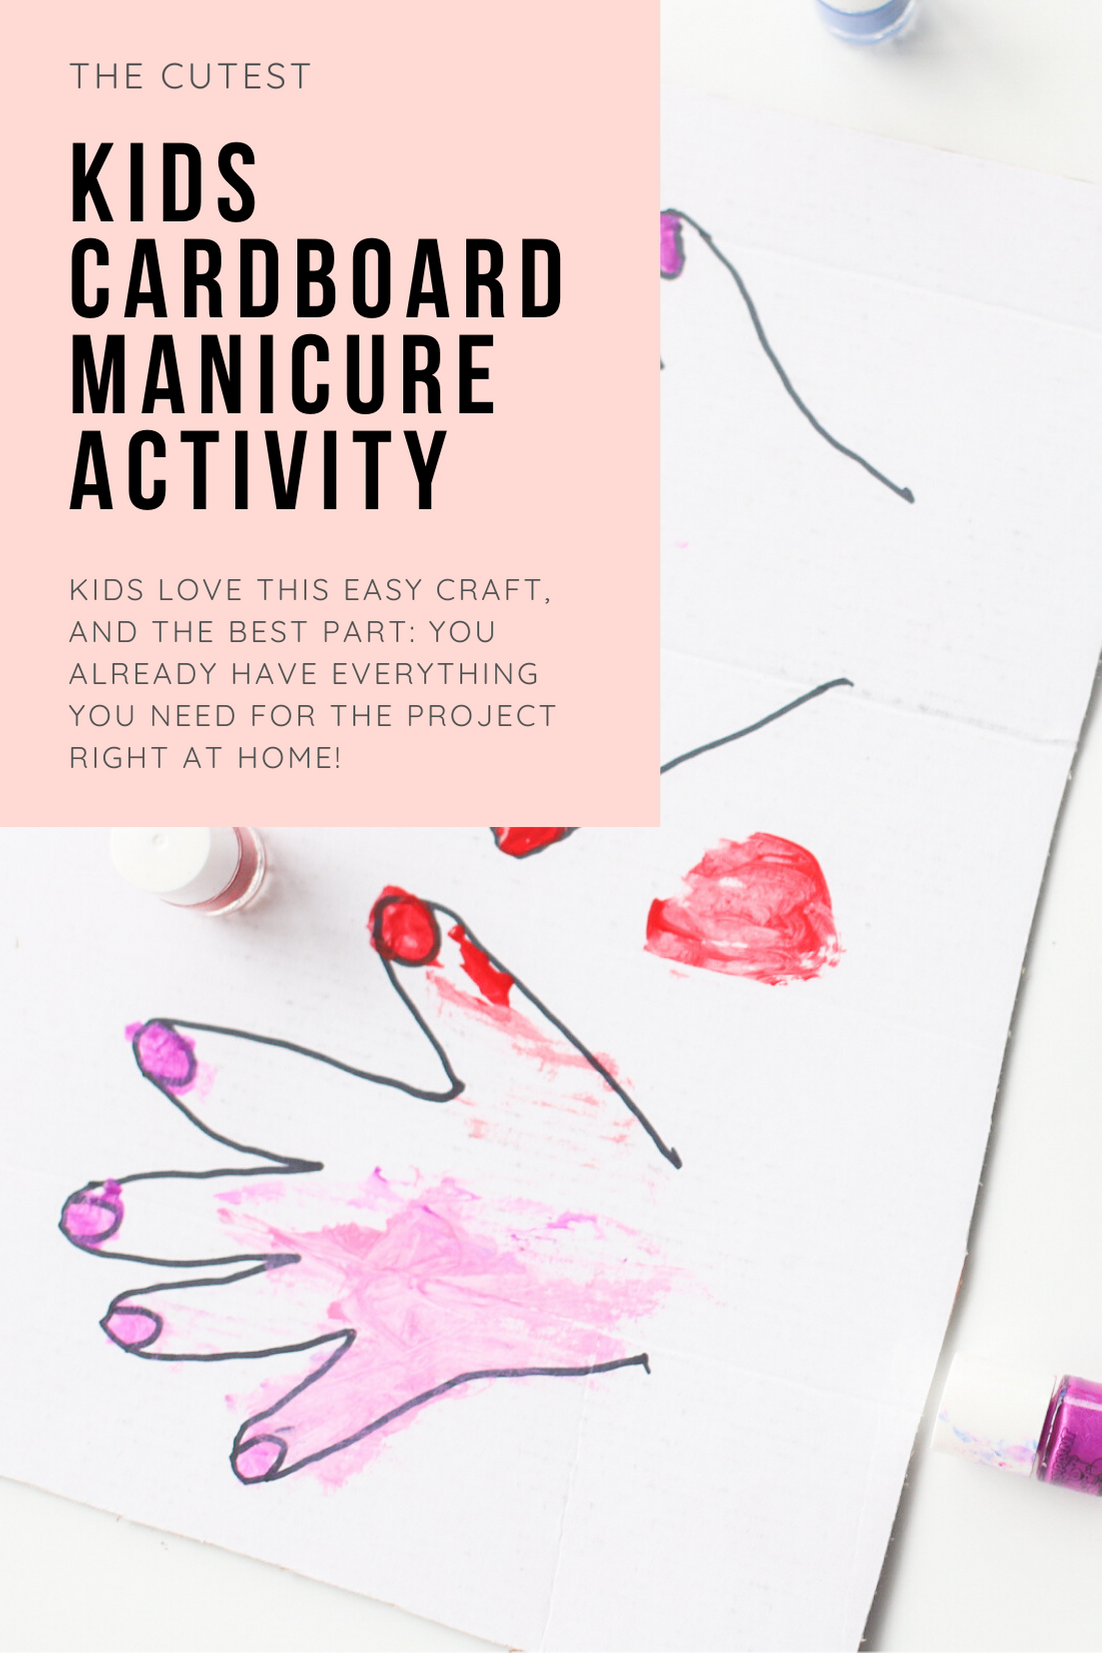 This DIY Kids Cardboard Manicure Activity is easy to set up, everything you will need you already have at home, and kids LOVE painting the pretend nails with nail polish! | glitterinc.com | @glitterinc